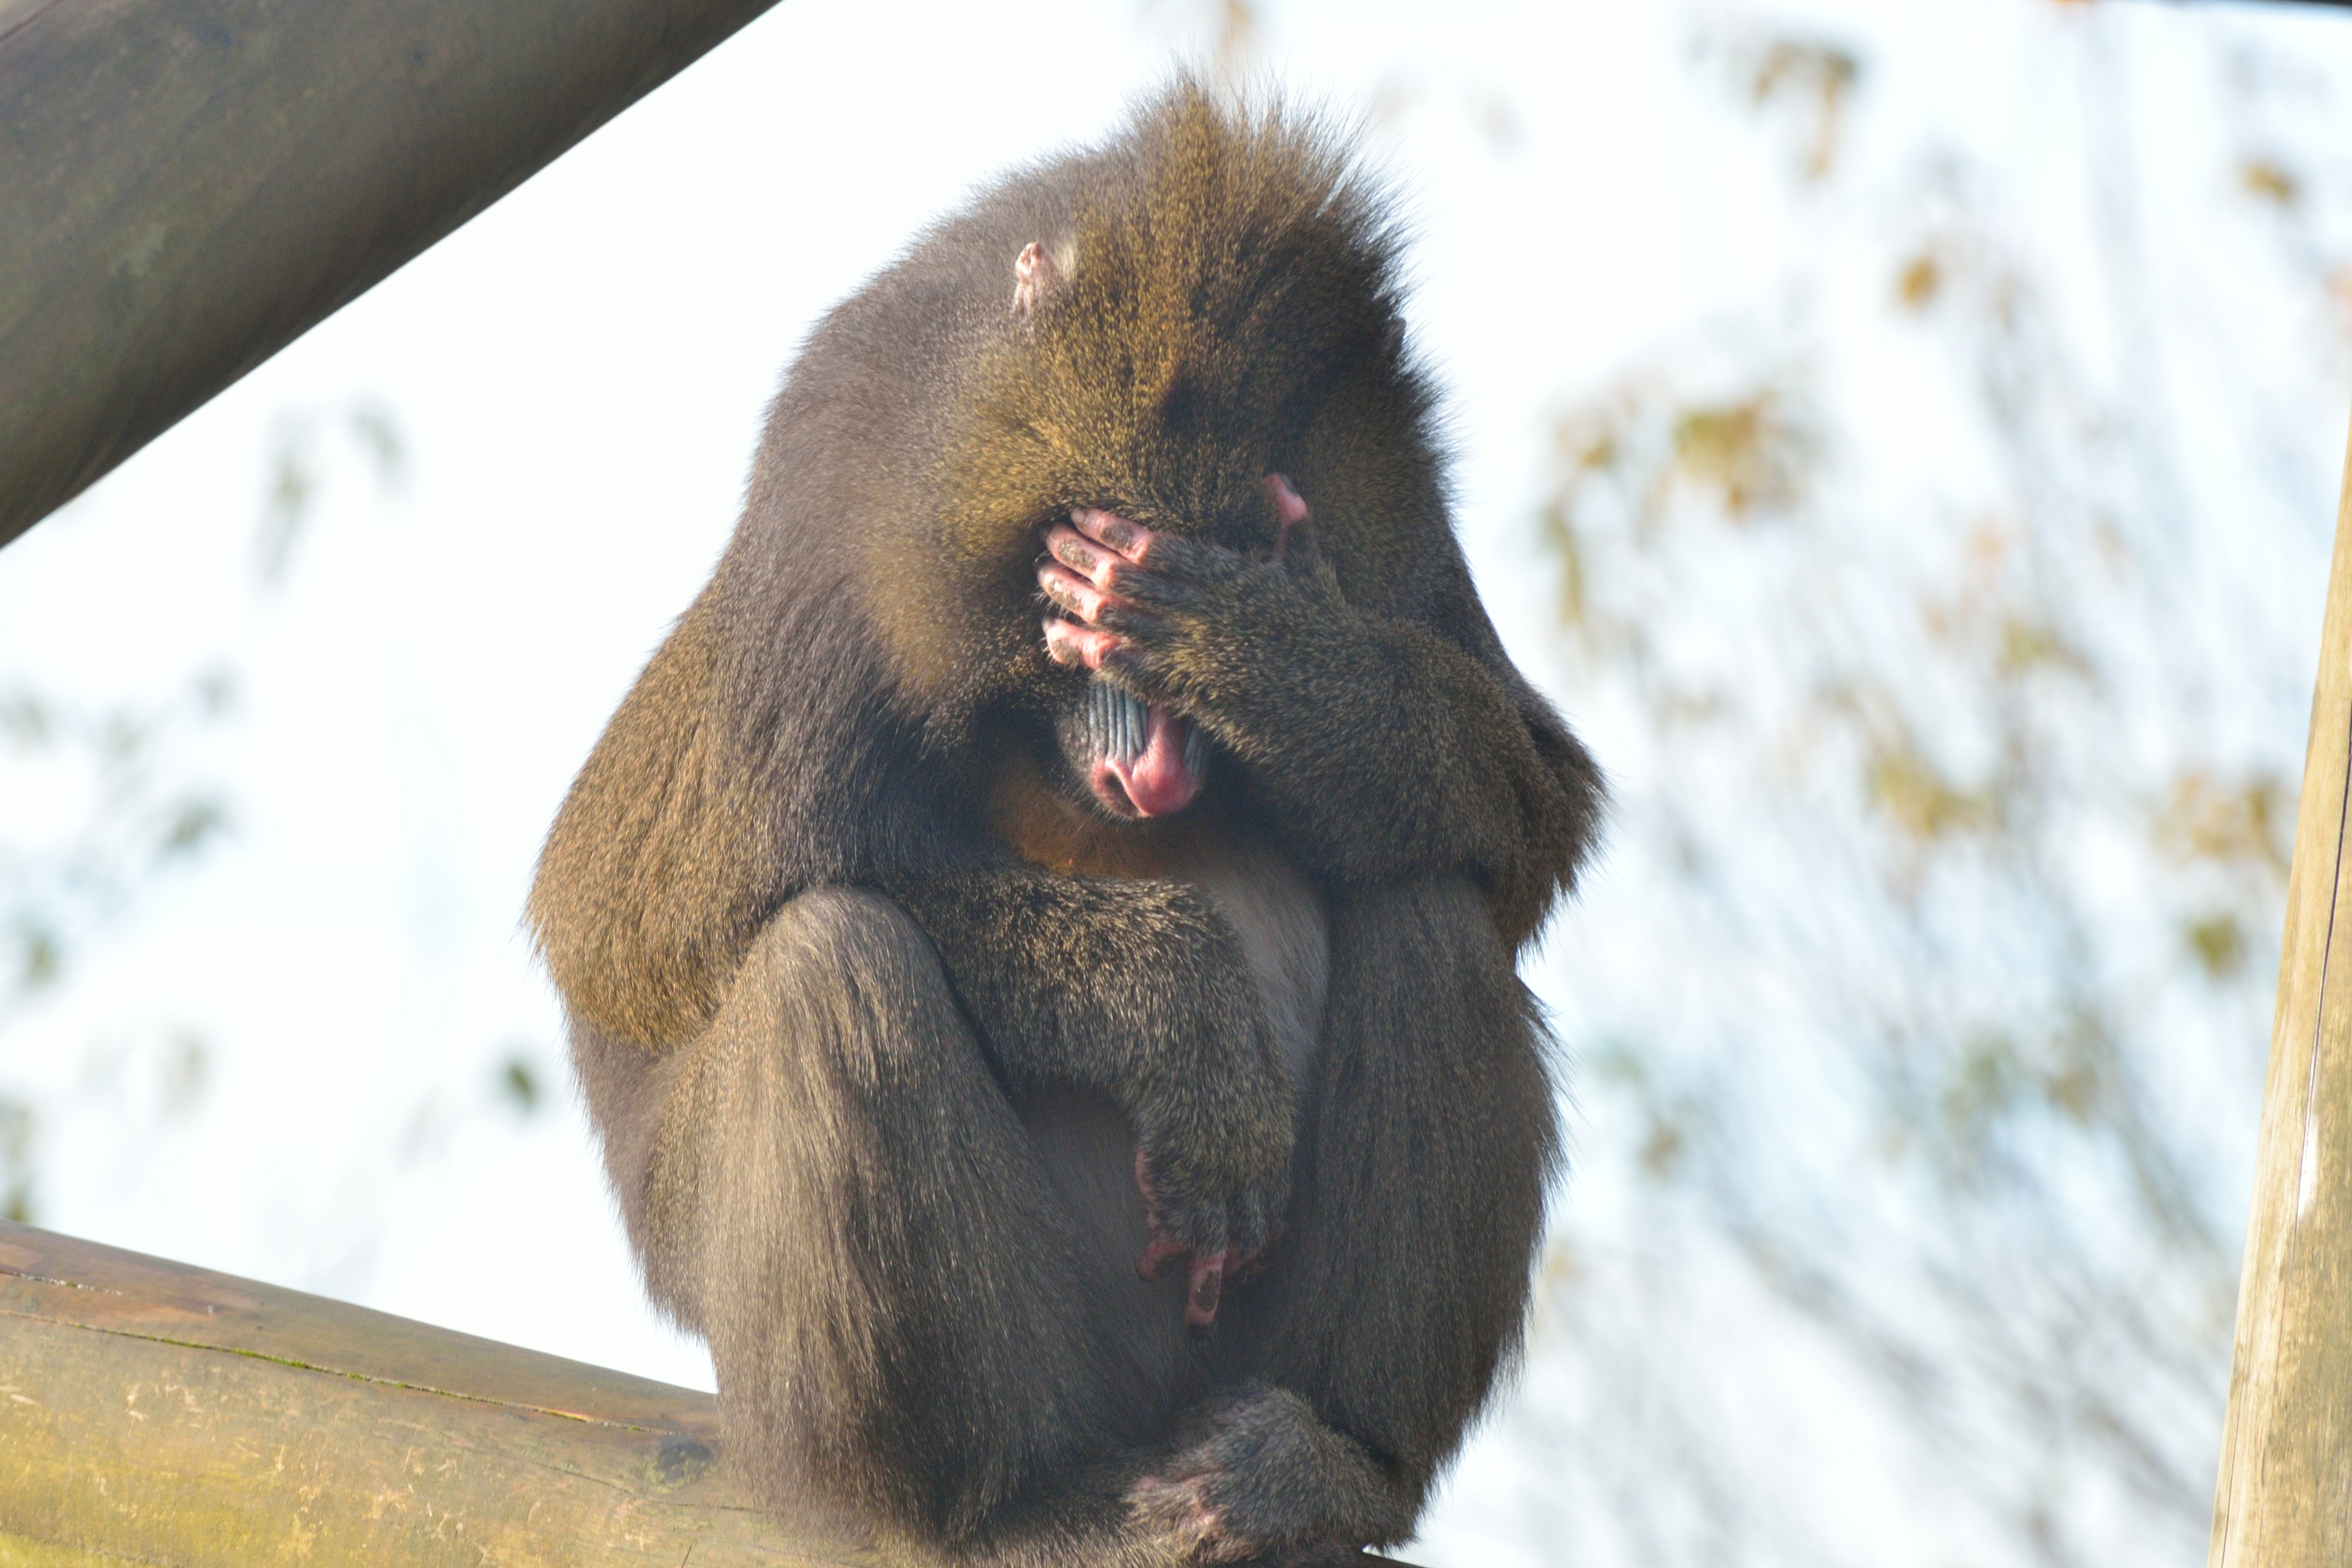 Baboon sitting on a wood beam, covering its face with its hand, looking like it is in a thoughtful or playful pose